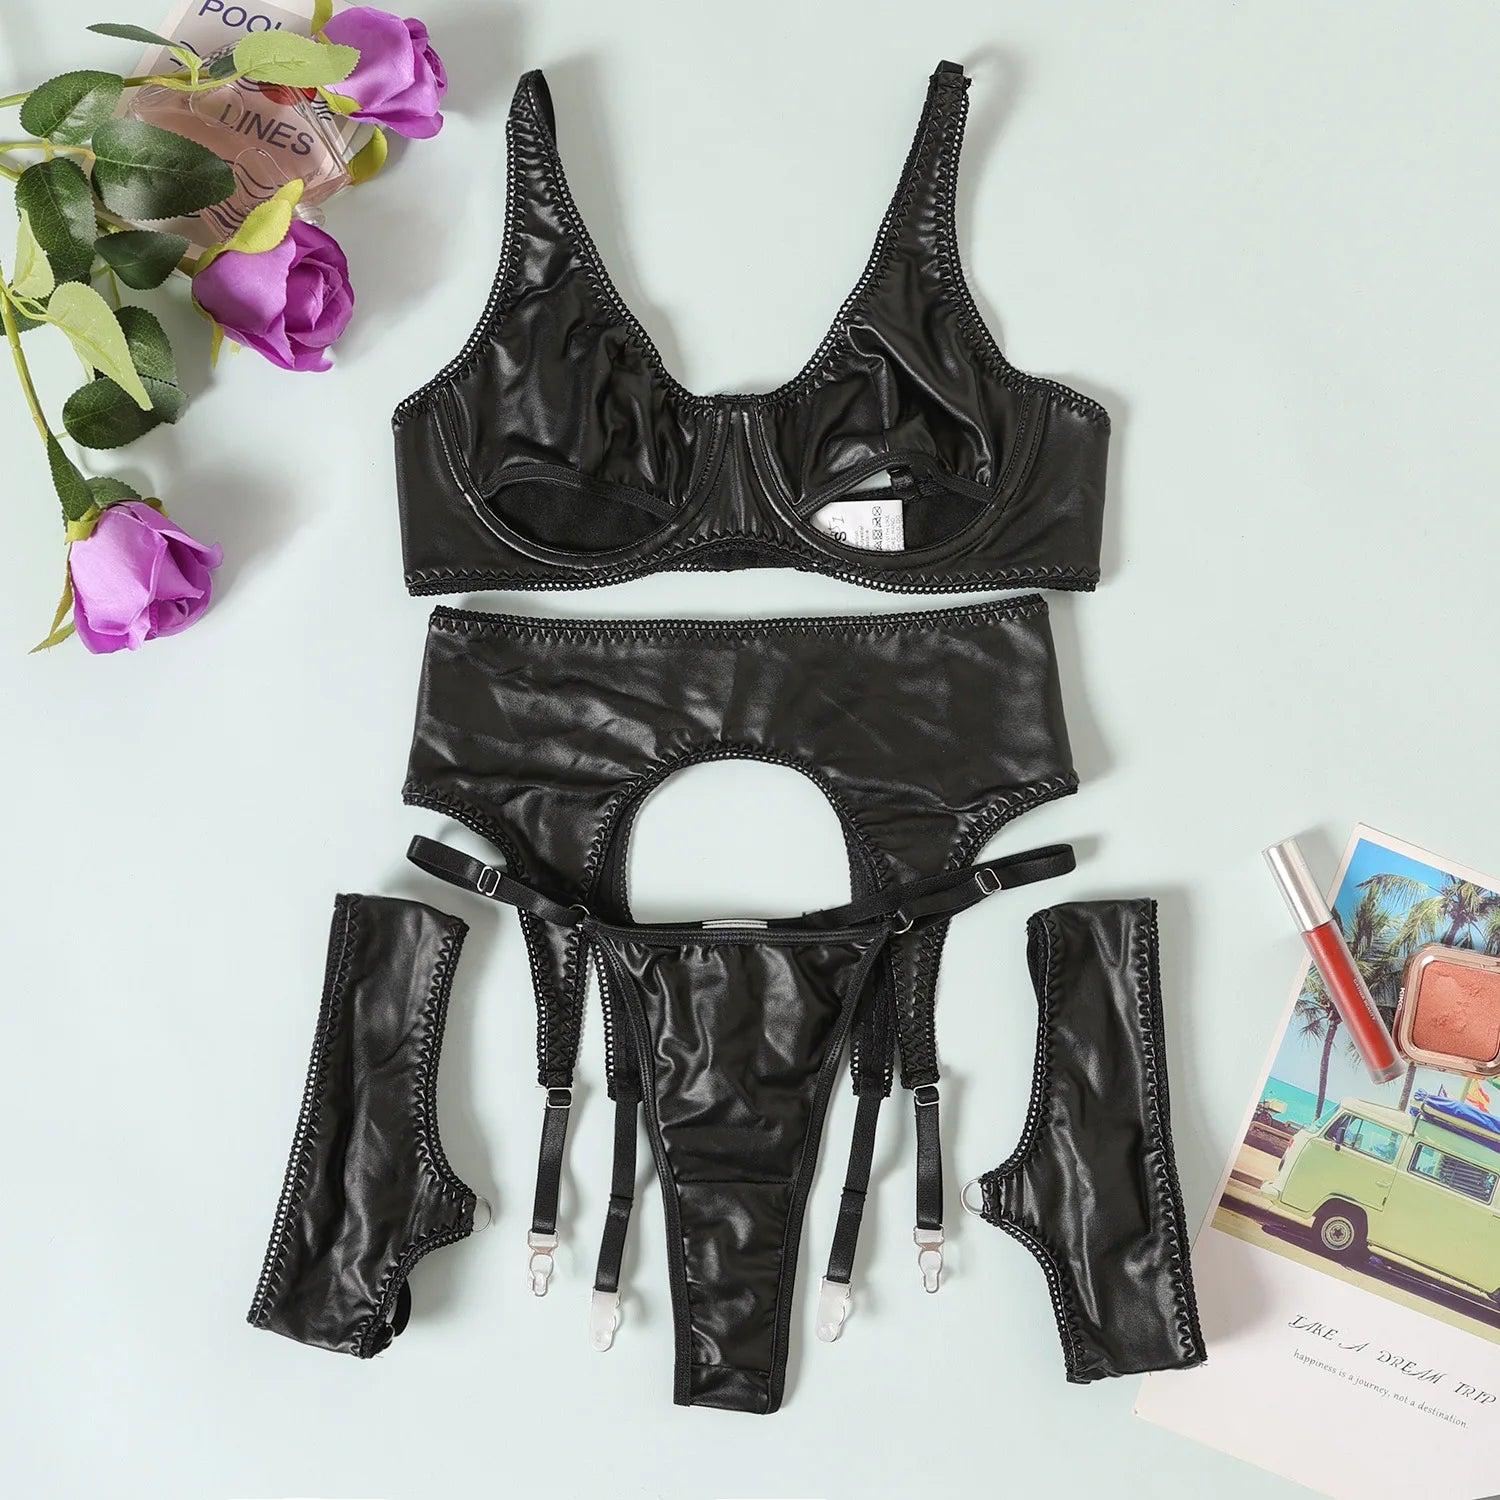 45391041036553|45391041069321|45391041102089 Fetish Pvc Lingerie Sissy Cup Out PU Leather Set